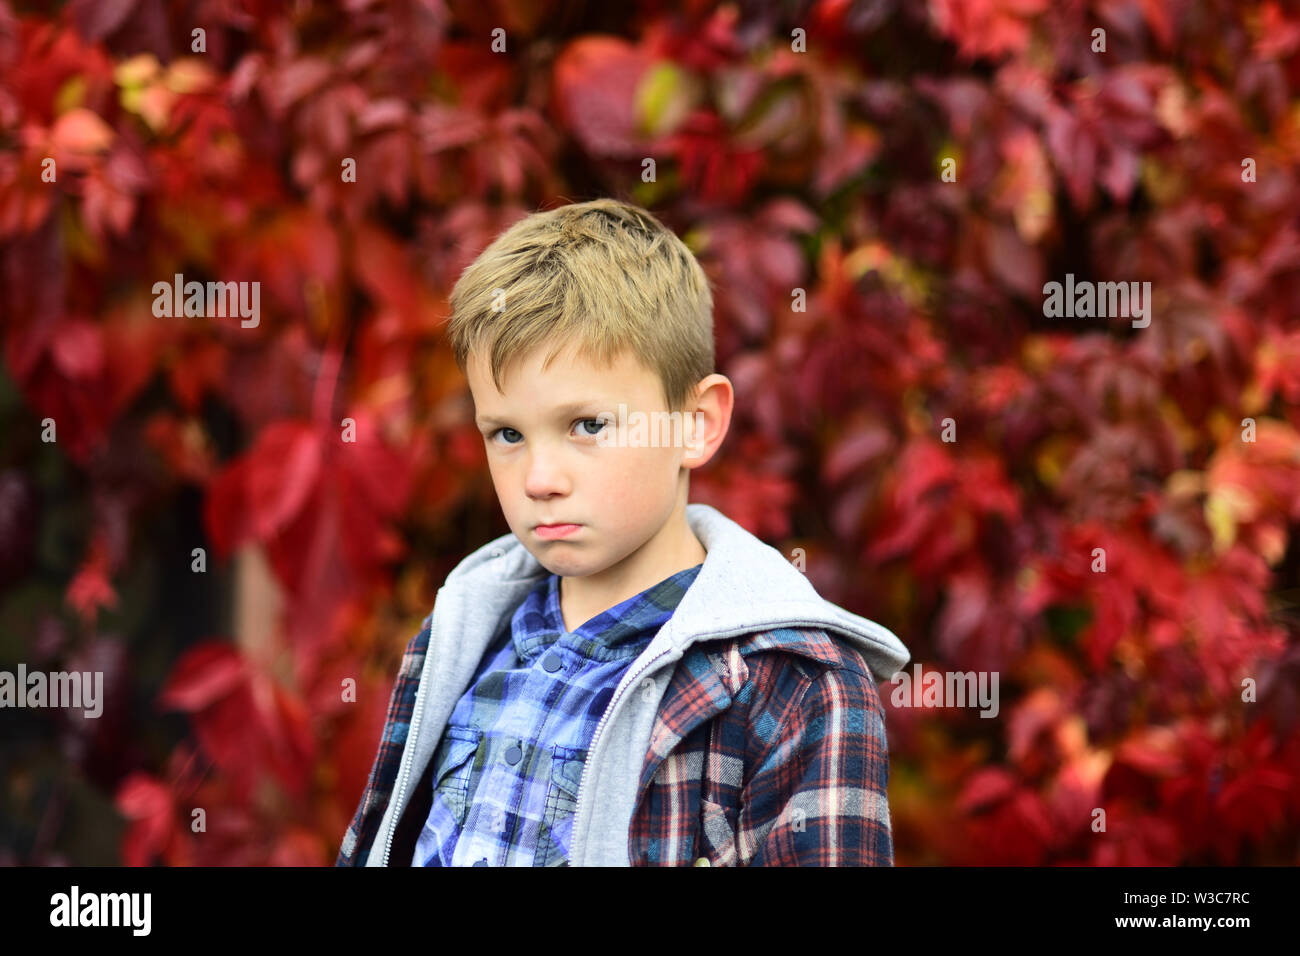 Sad and unhappy. Sad boy is blue in autumn. Small boy with sad look. Small child feel sad. Some days are just sad days, thats all Stock Photo